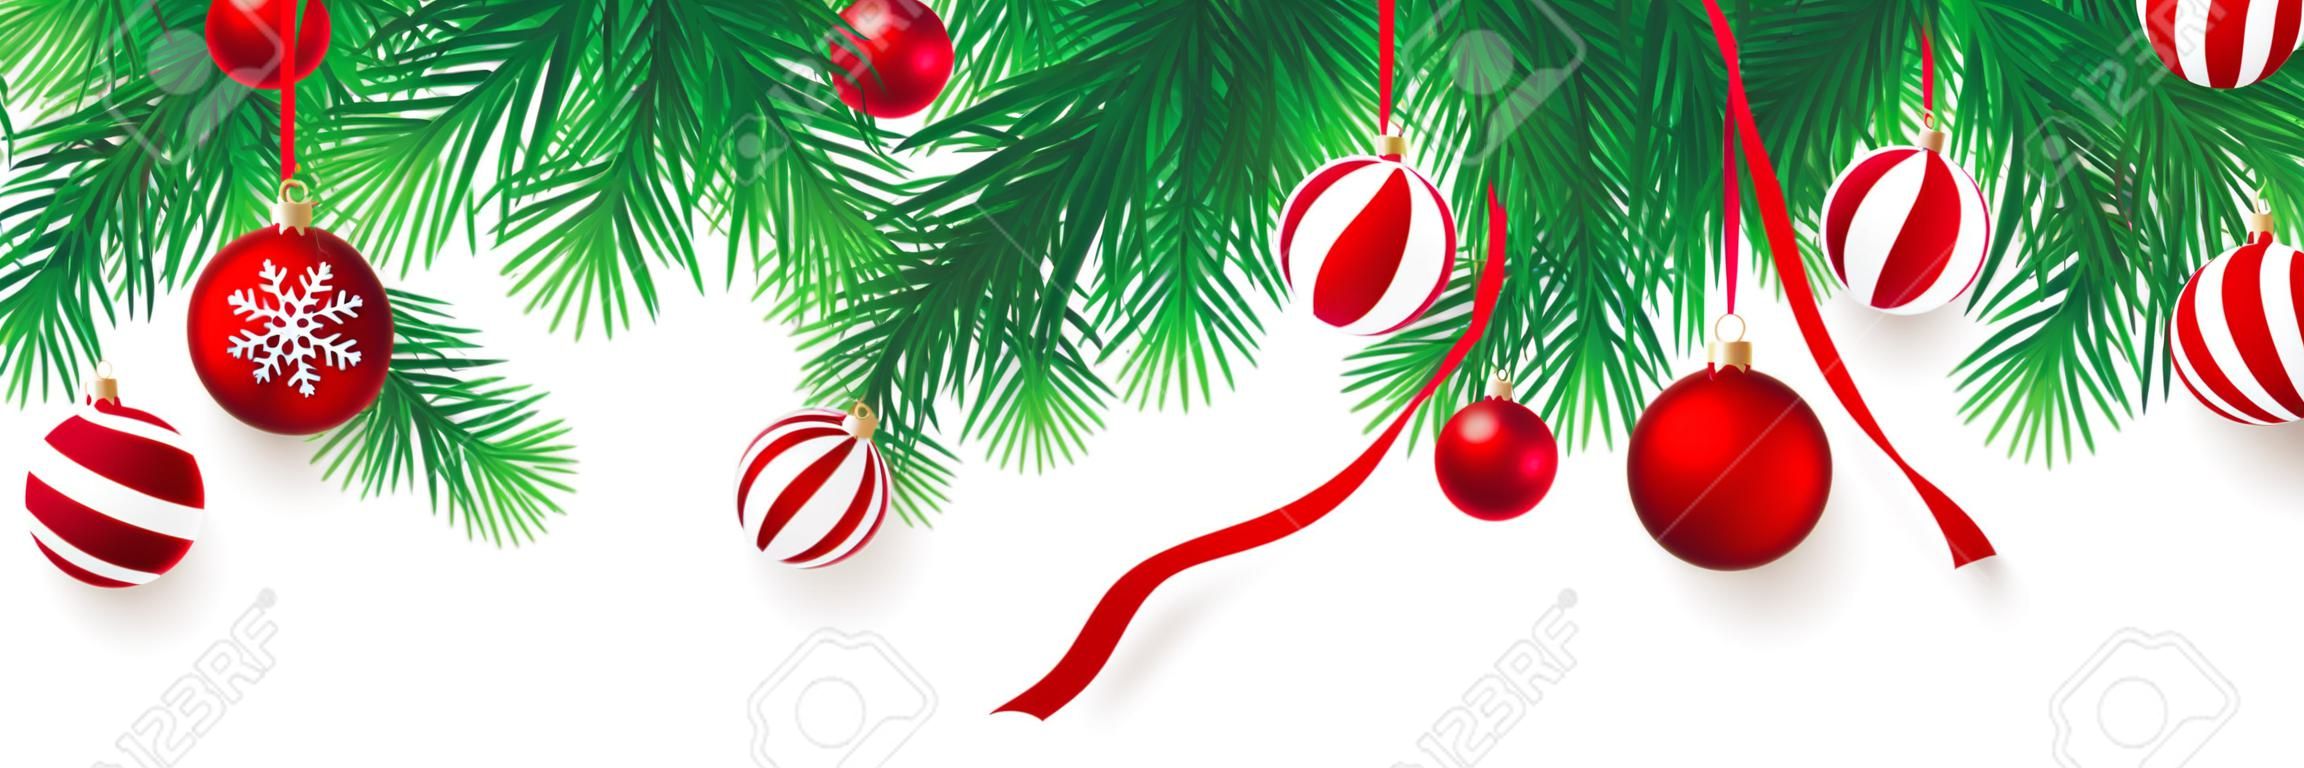 Festive Christmas or New Year Background. Christmas Tree Branches and xmas red ball. Vector illustration.